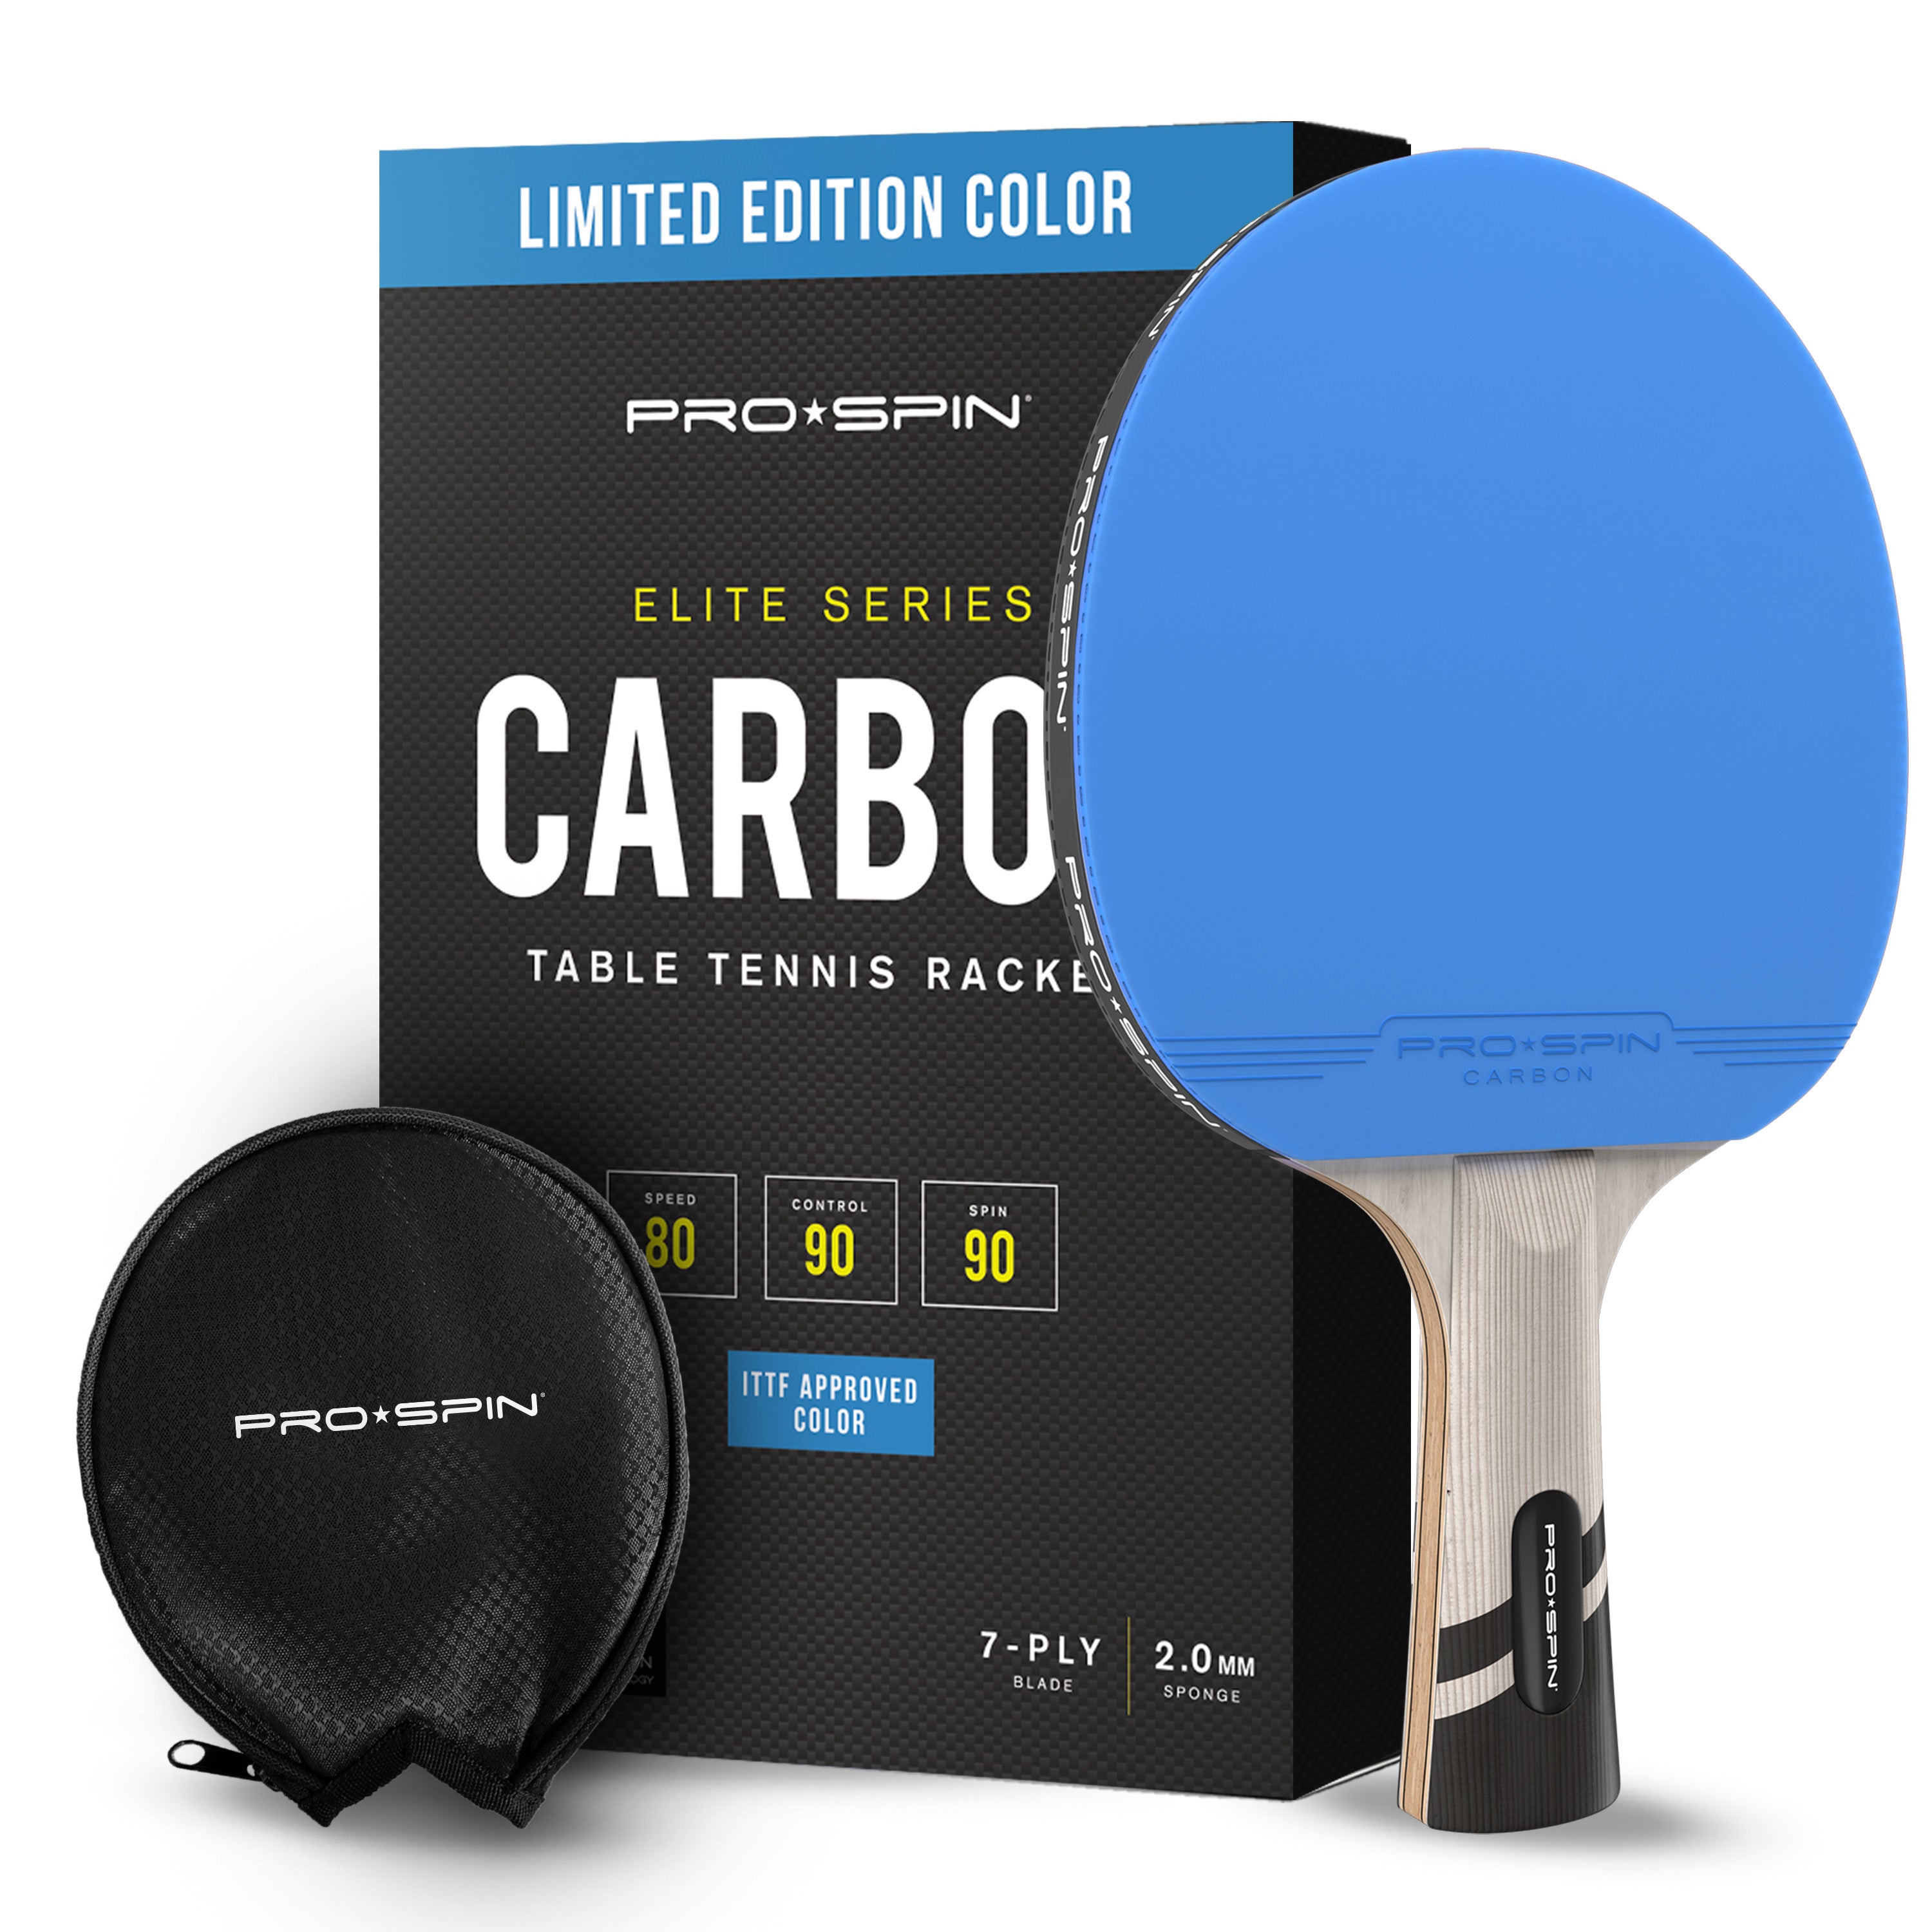 Carbon Fiber Ping Pong Paddle, Limited Edition Color